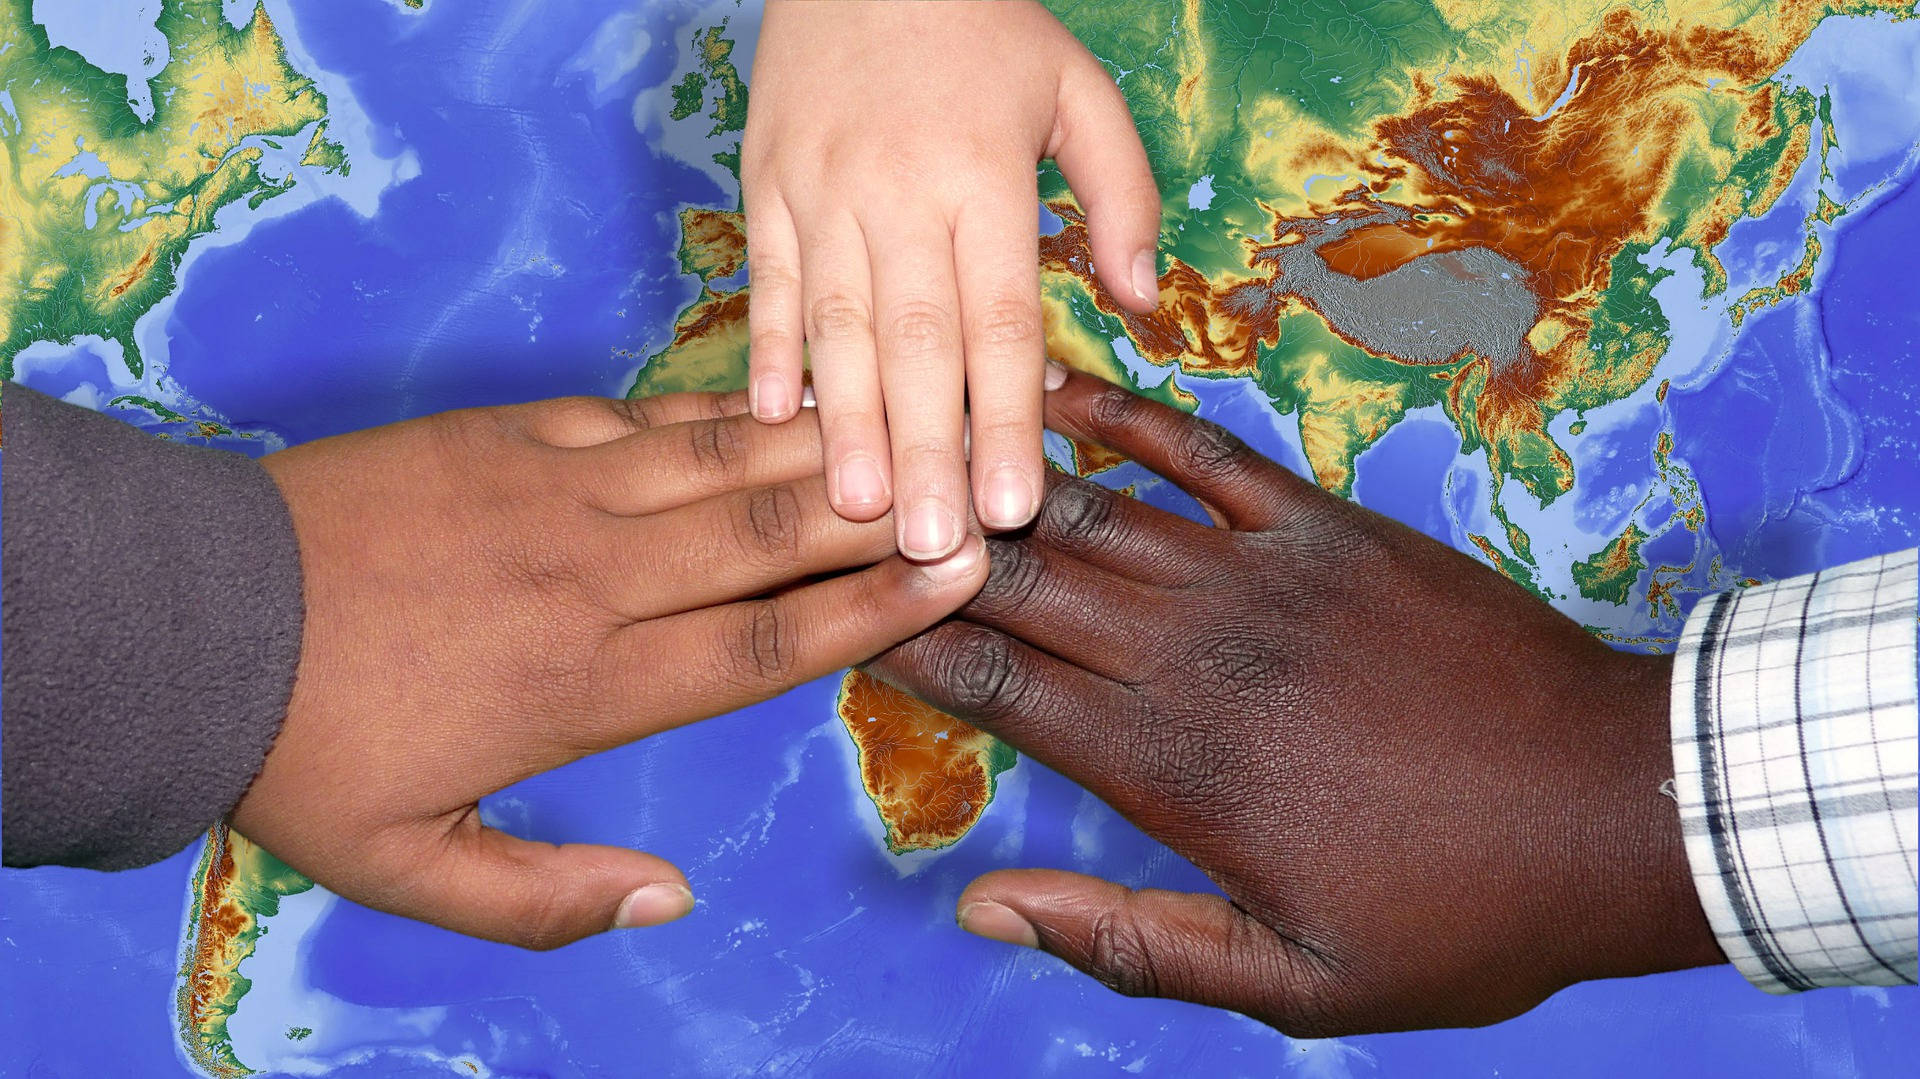 World Peace For Different Races Wallpaper